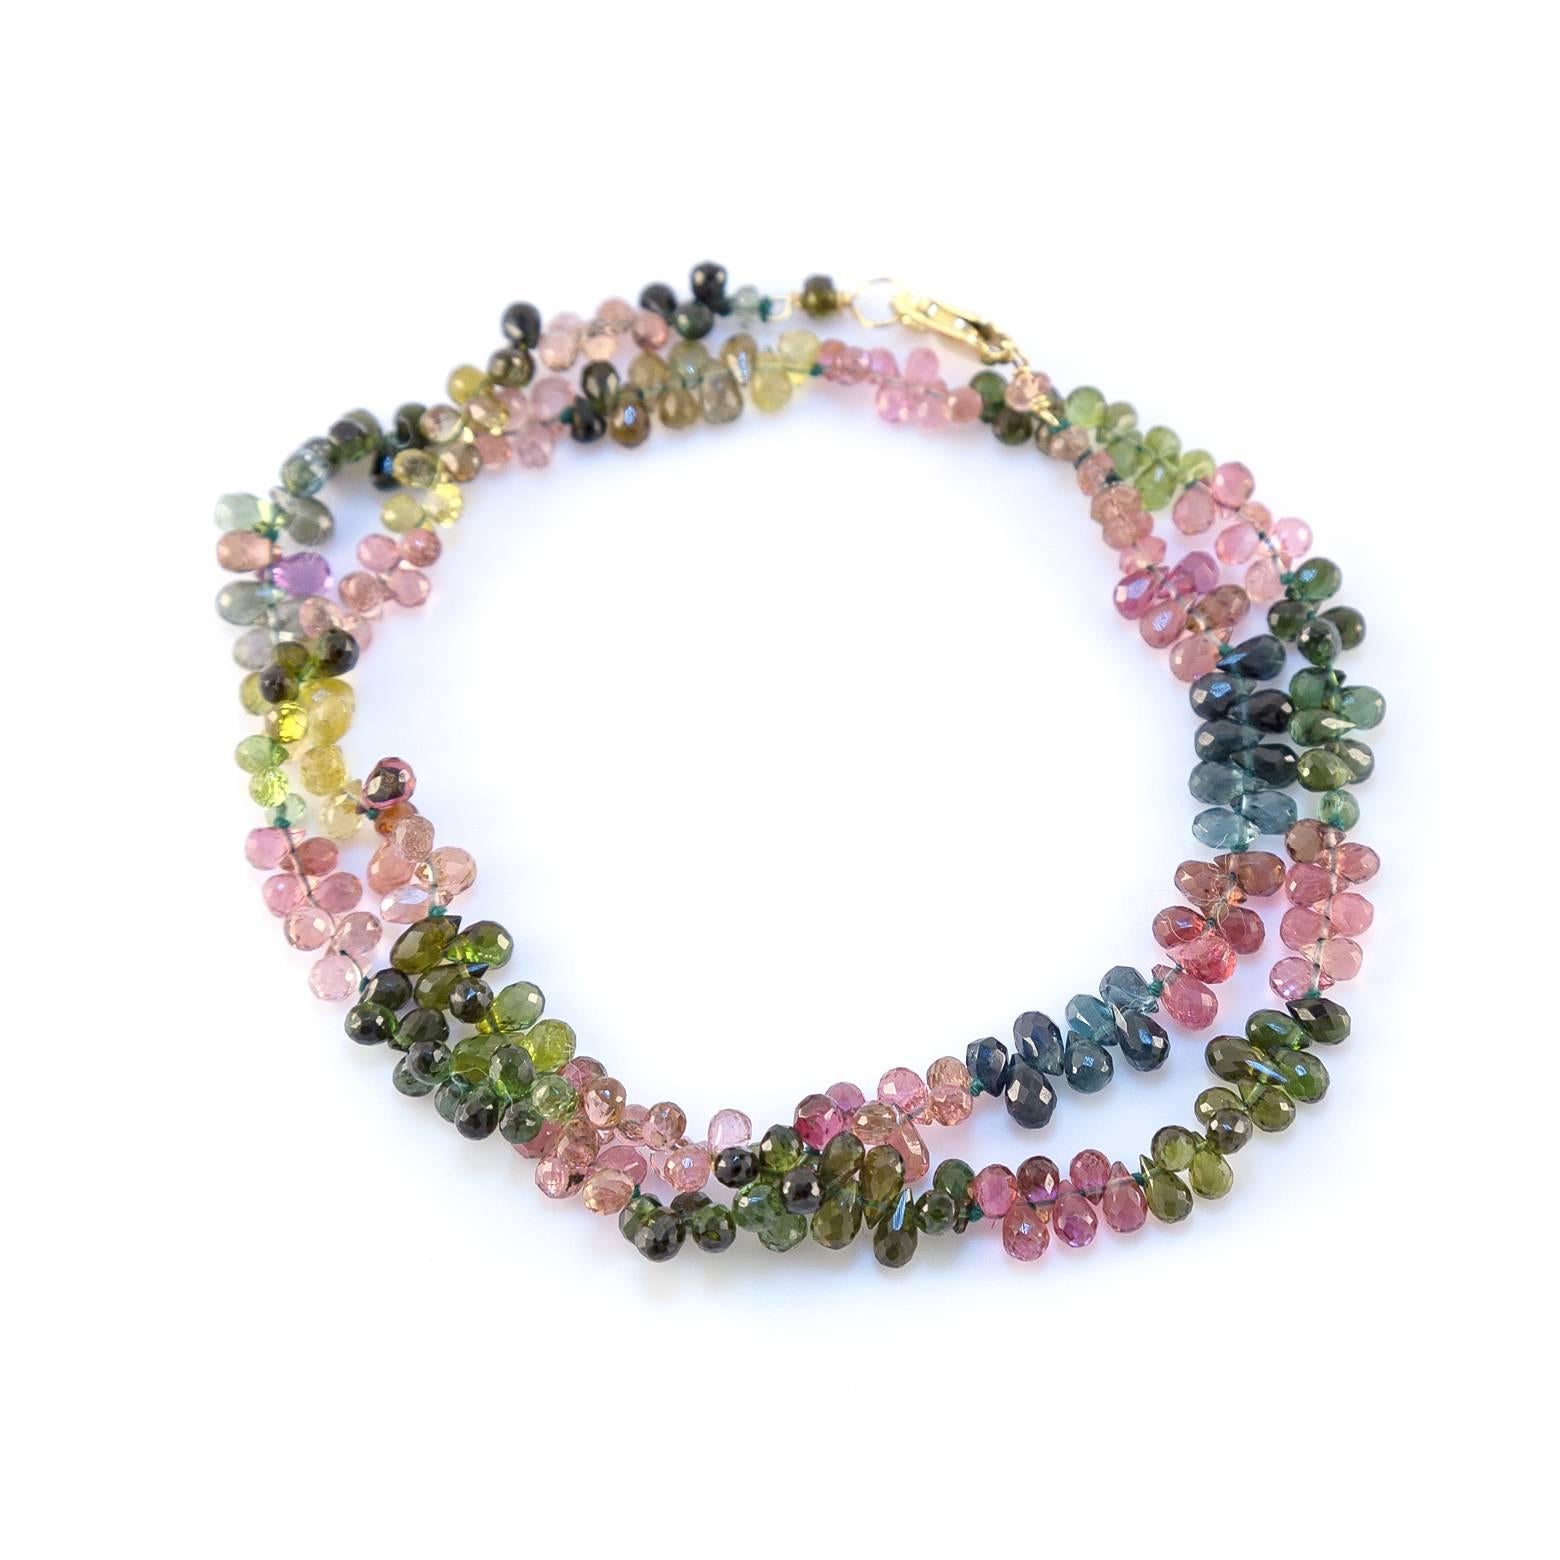 Pink, Yellow, Blue, and Green Tourmaline Briolettes- oh my! This fascinating necklace is lightweight, intricate and full of color. The tourmaline briolettes are rich and luscious and absolutely dazzle! It's comfortable and the alternating colors are